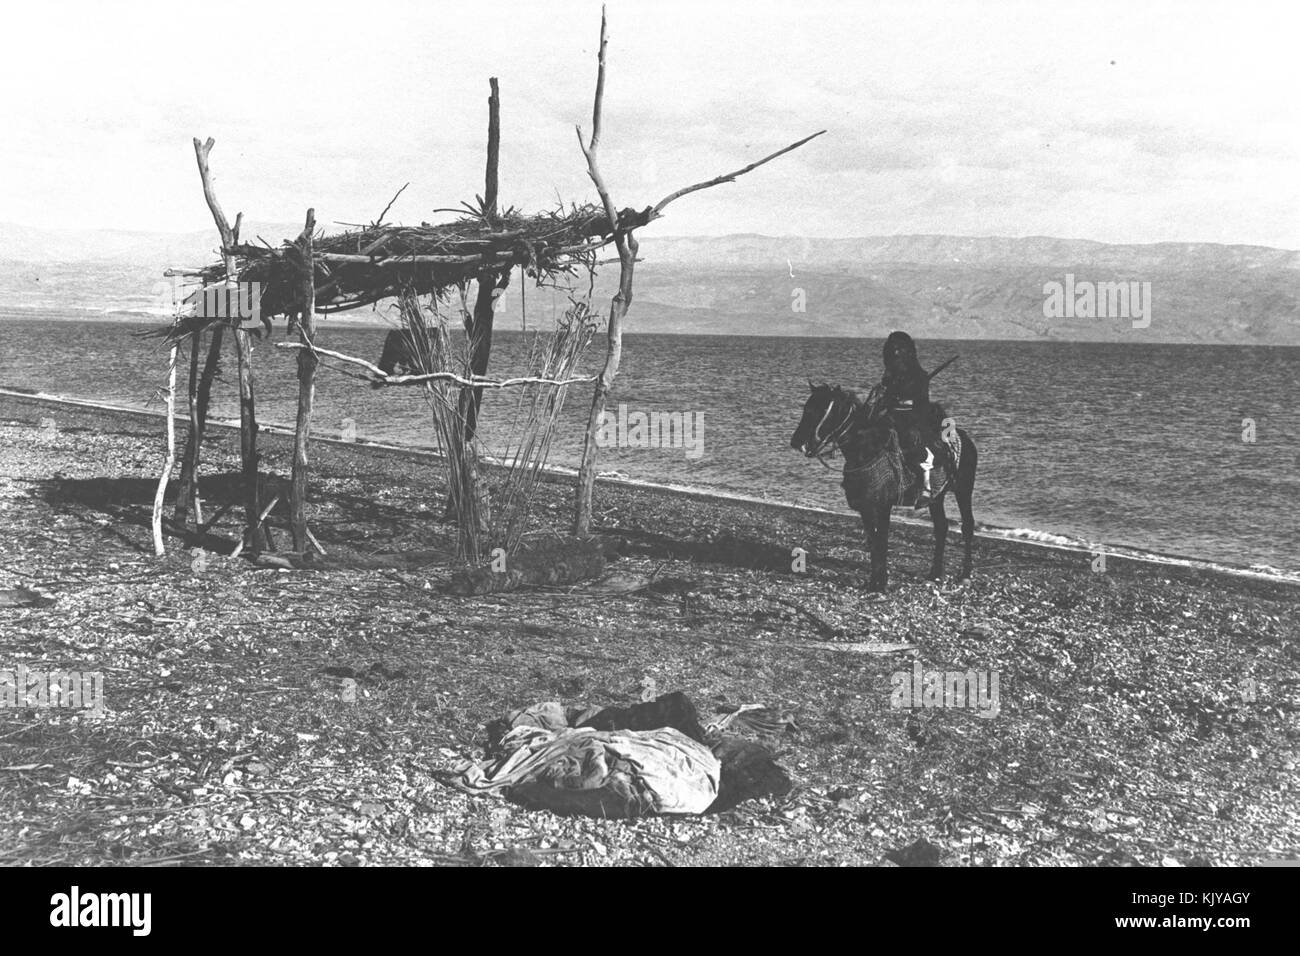 ON THE SHORES OF THE DEAD SEA, 1910 1920. COURTESY OF AMERICAN COLONY. Stock Photo